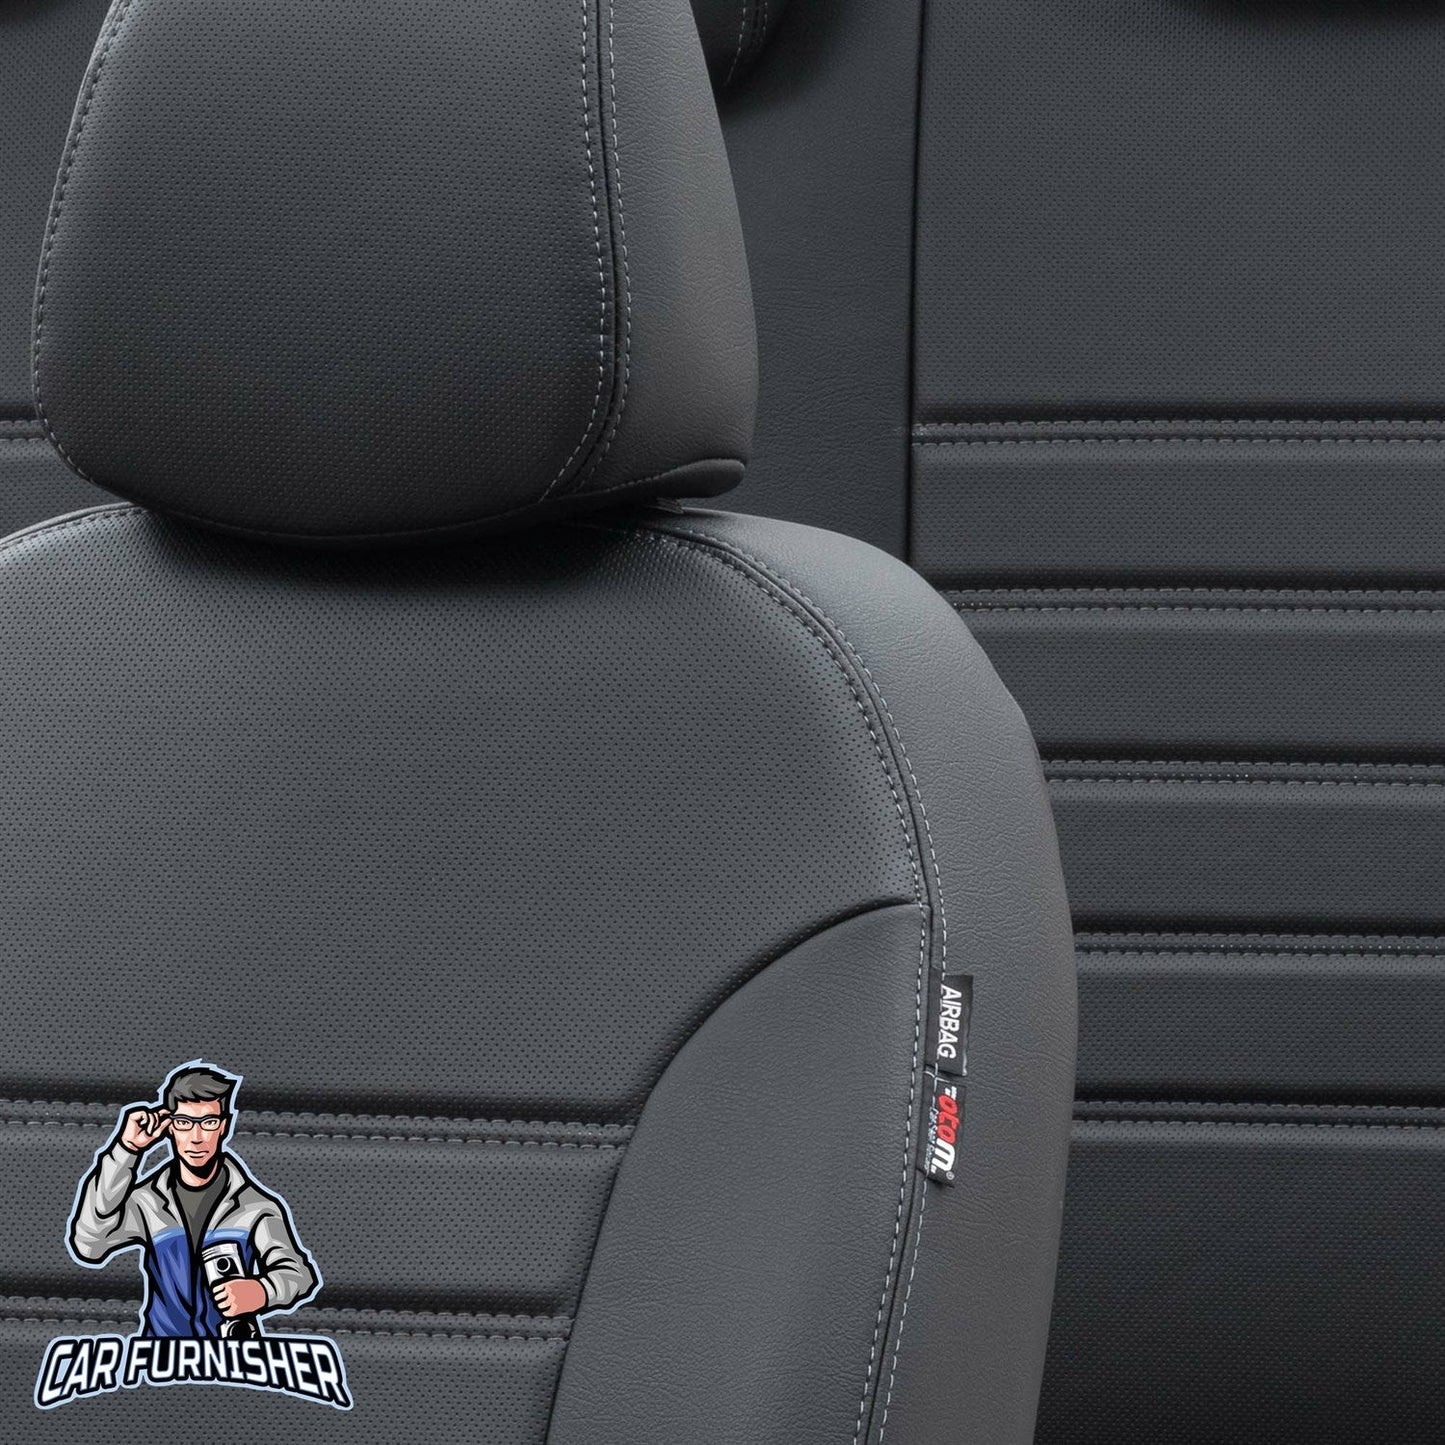 Renault Modus Seat Covers Istanbul Leather Design Black Leather